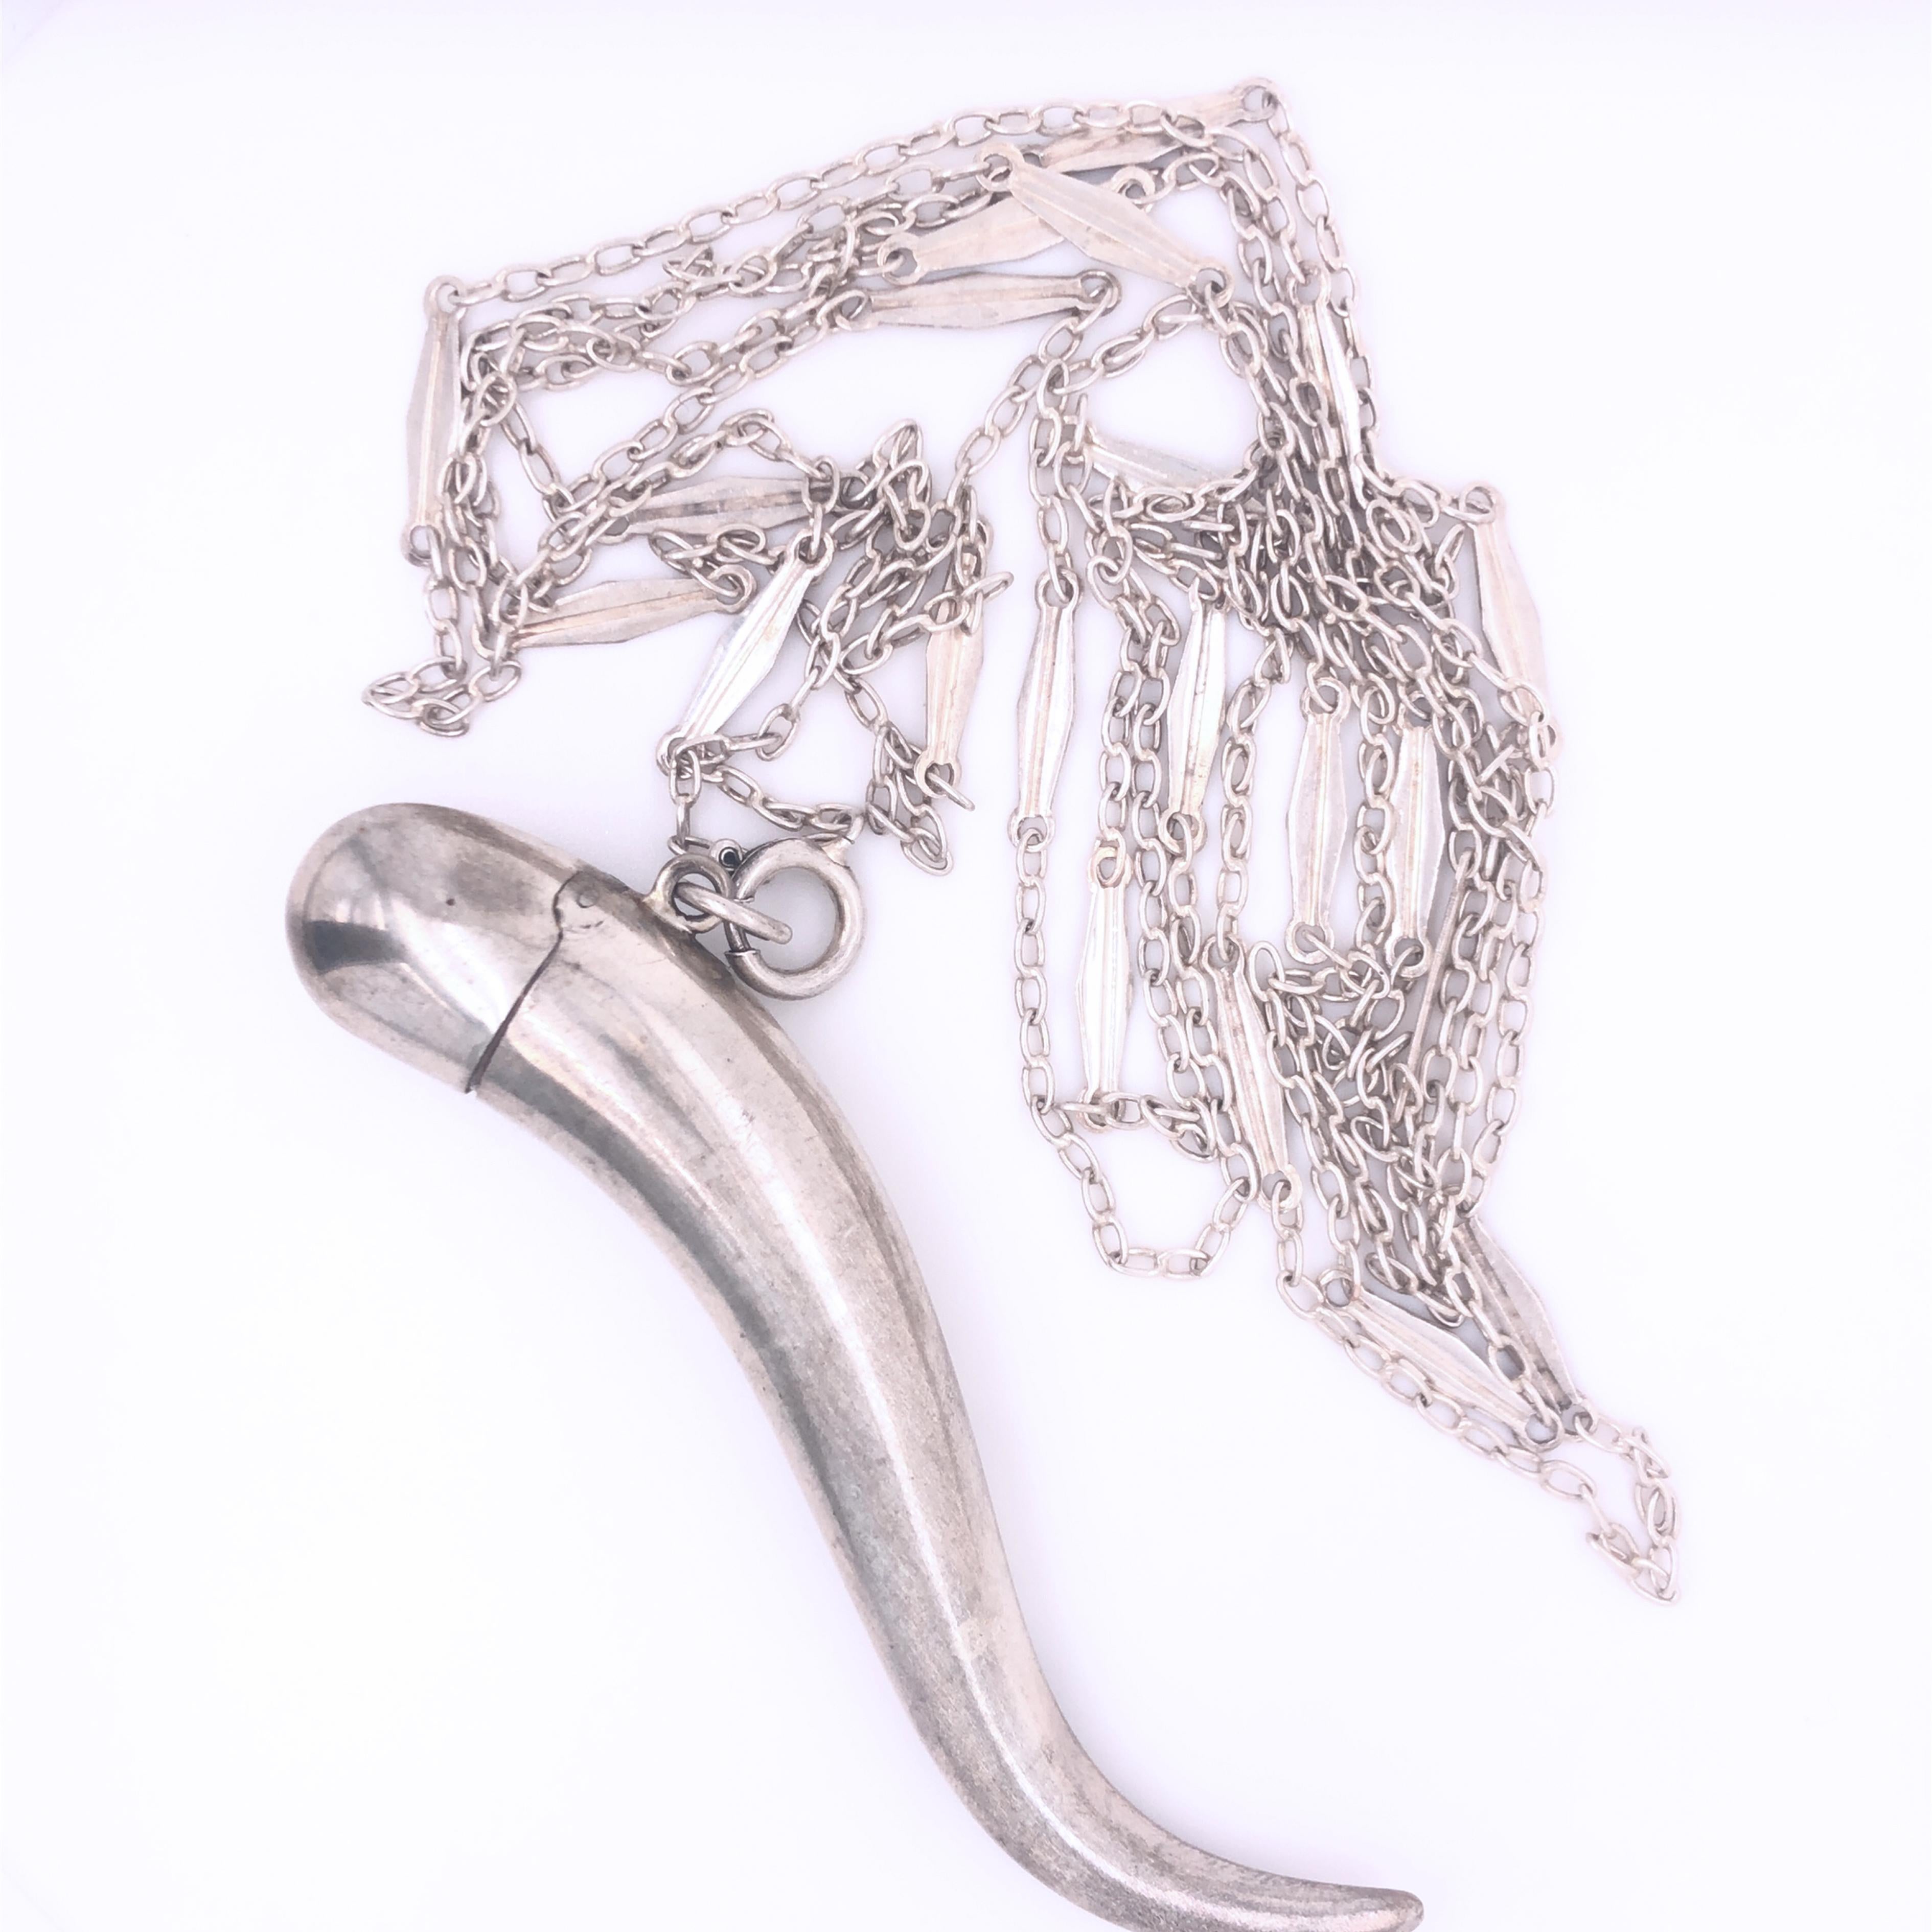 Original 1920 Silver Perfume Flask Pendant And Long Chain 9